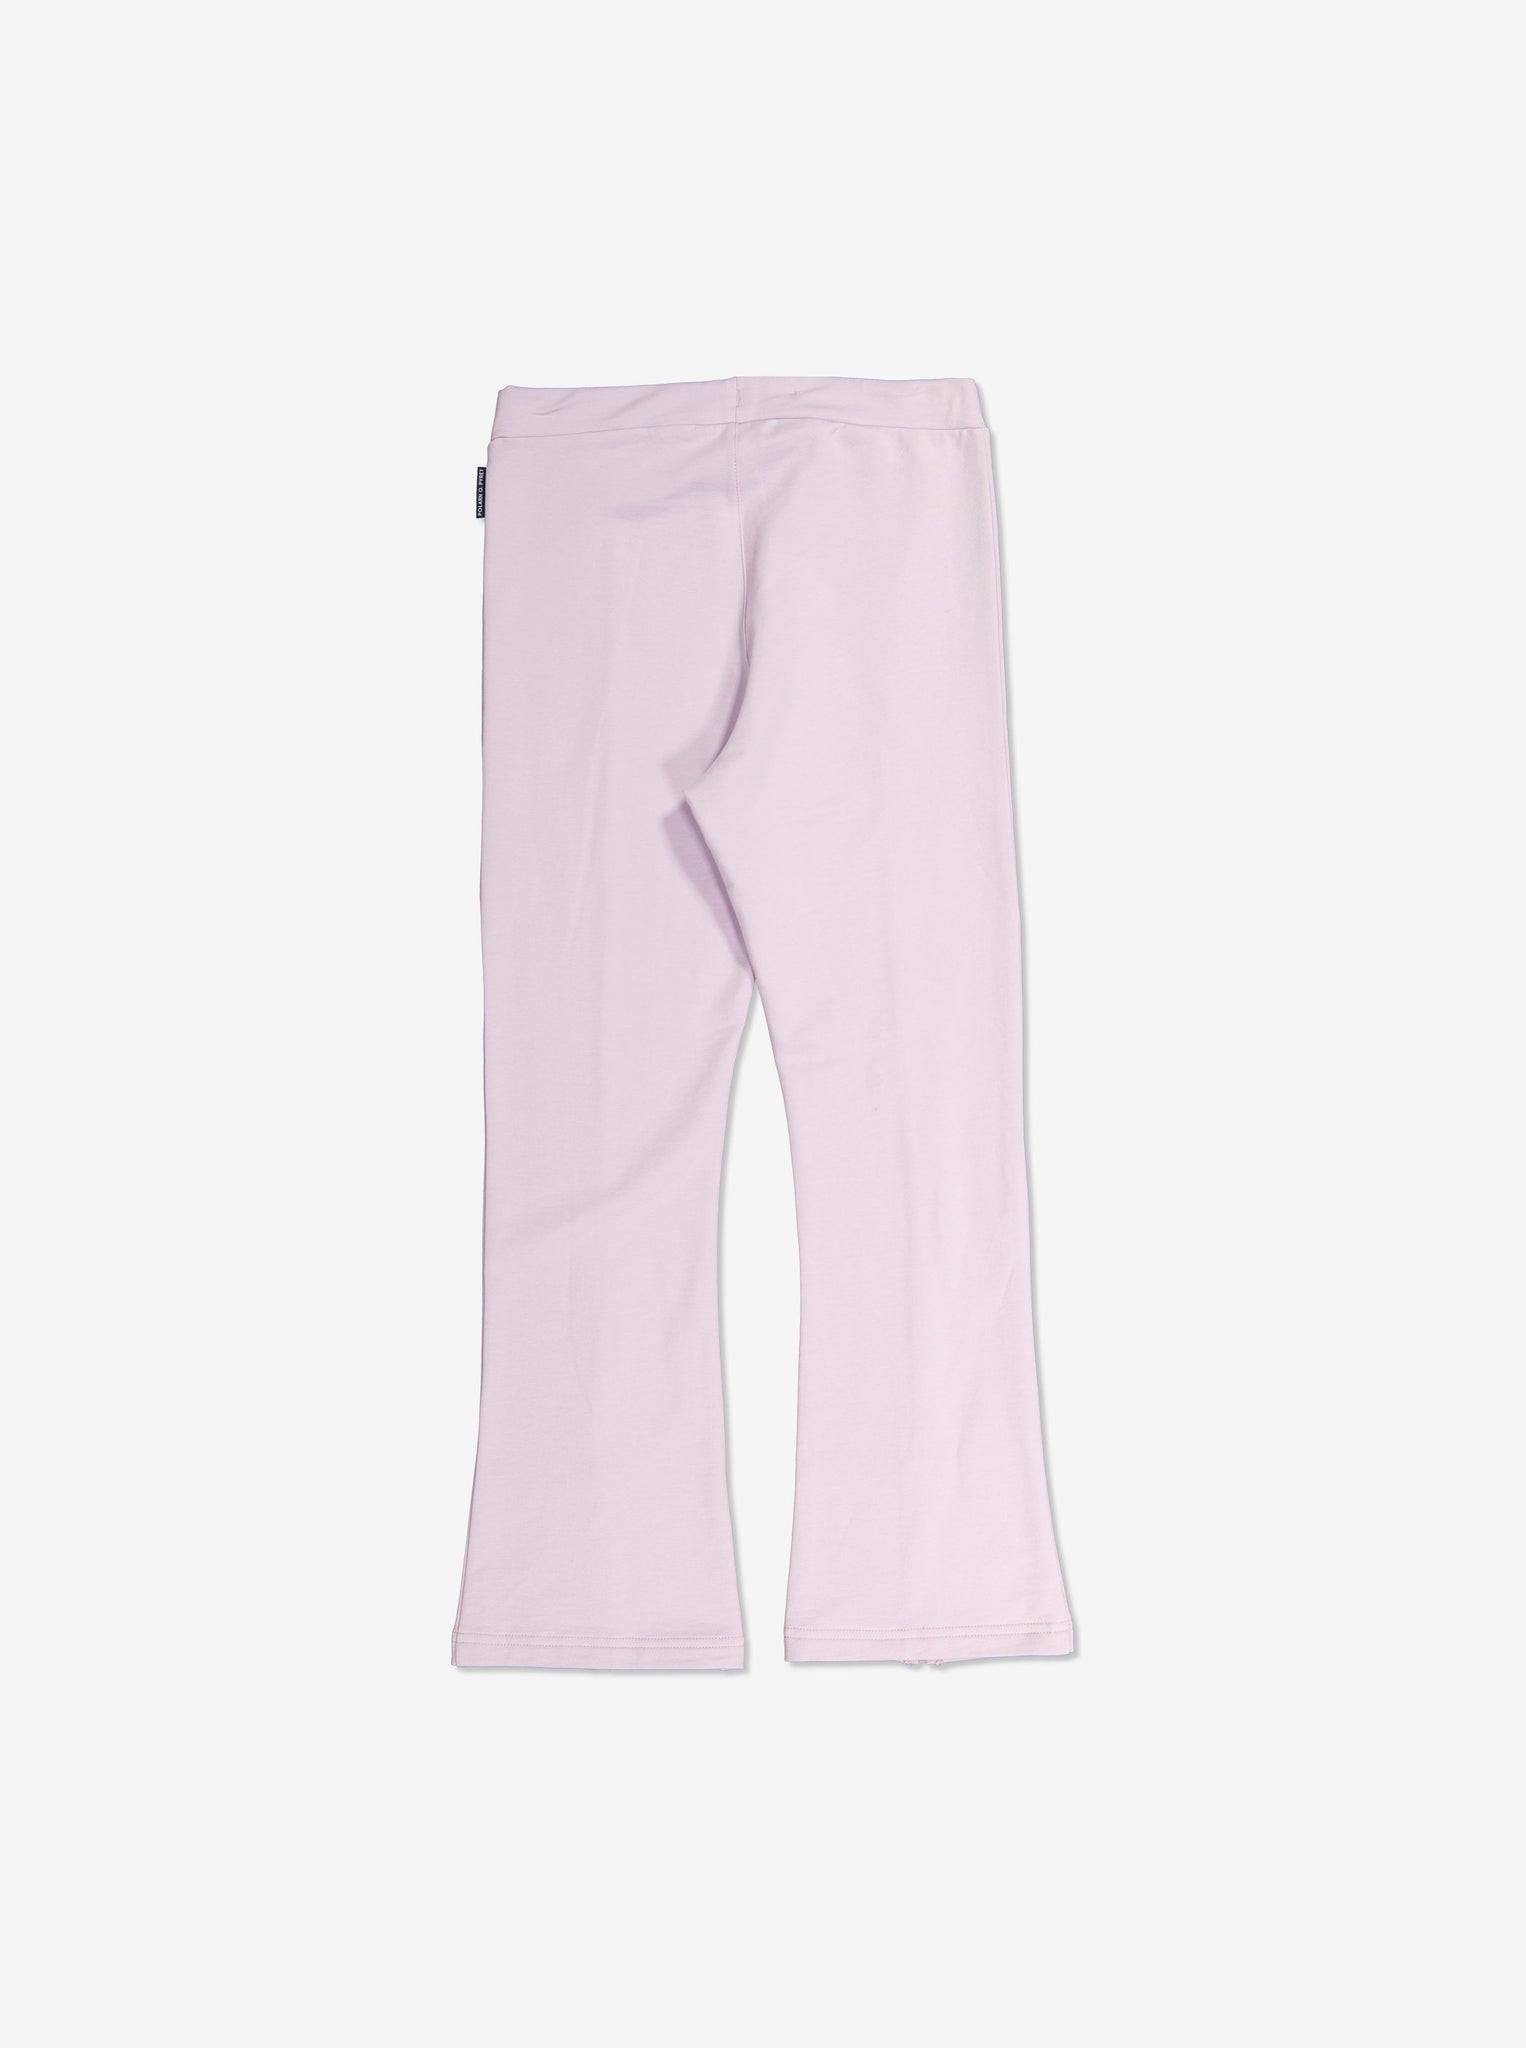  Organic Pink Flared Kids Trousers from Polarn O. Pyret Kidswear. Made from eco-friendly materials.